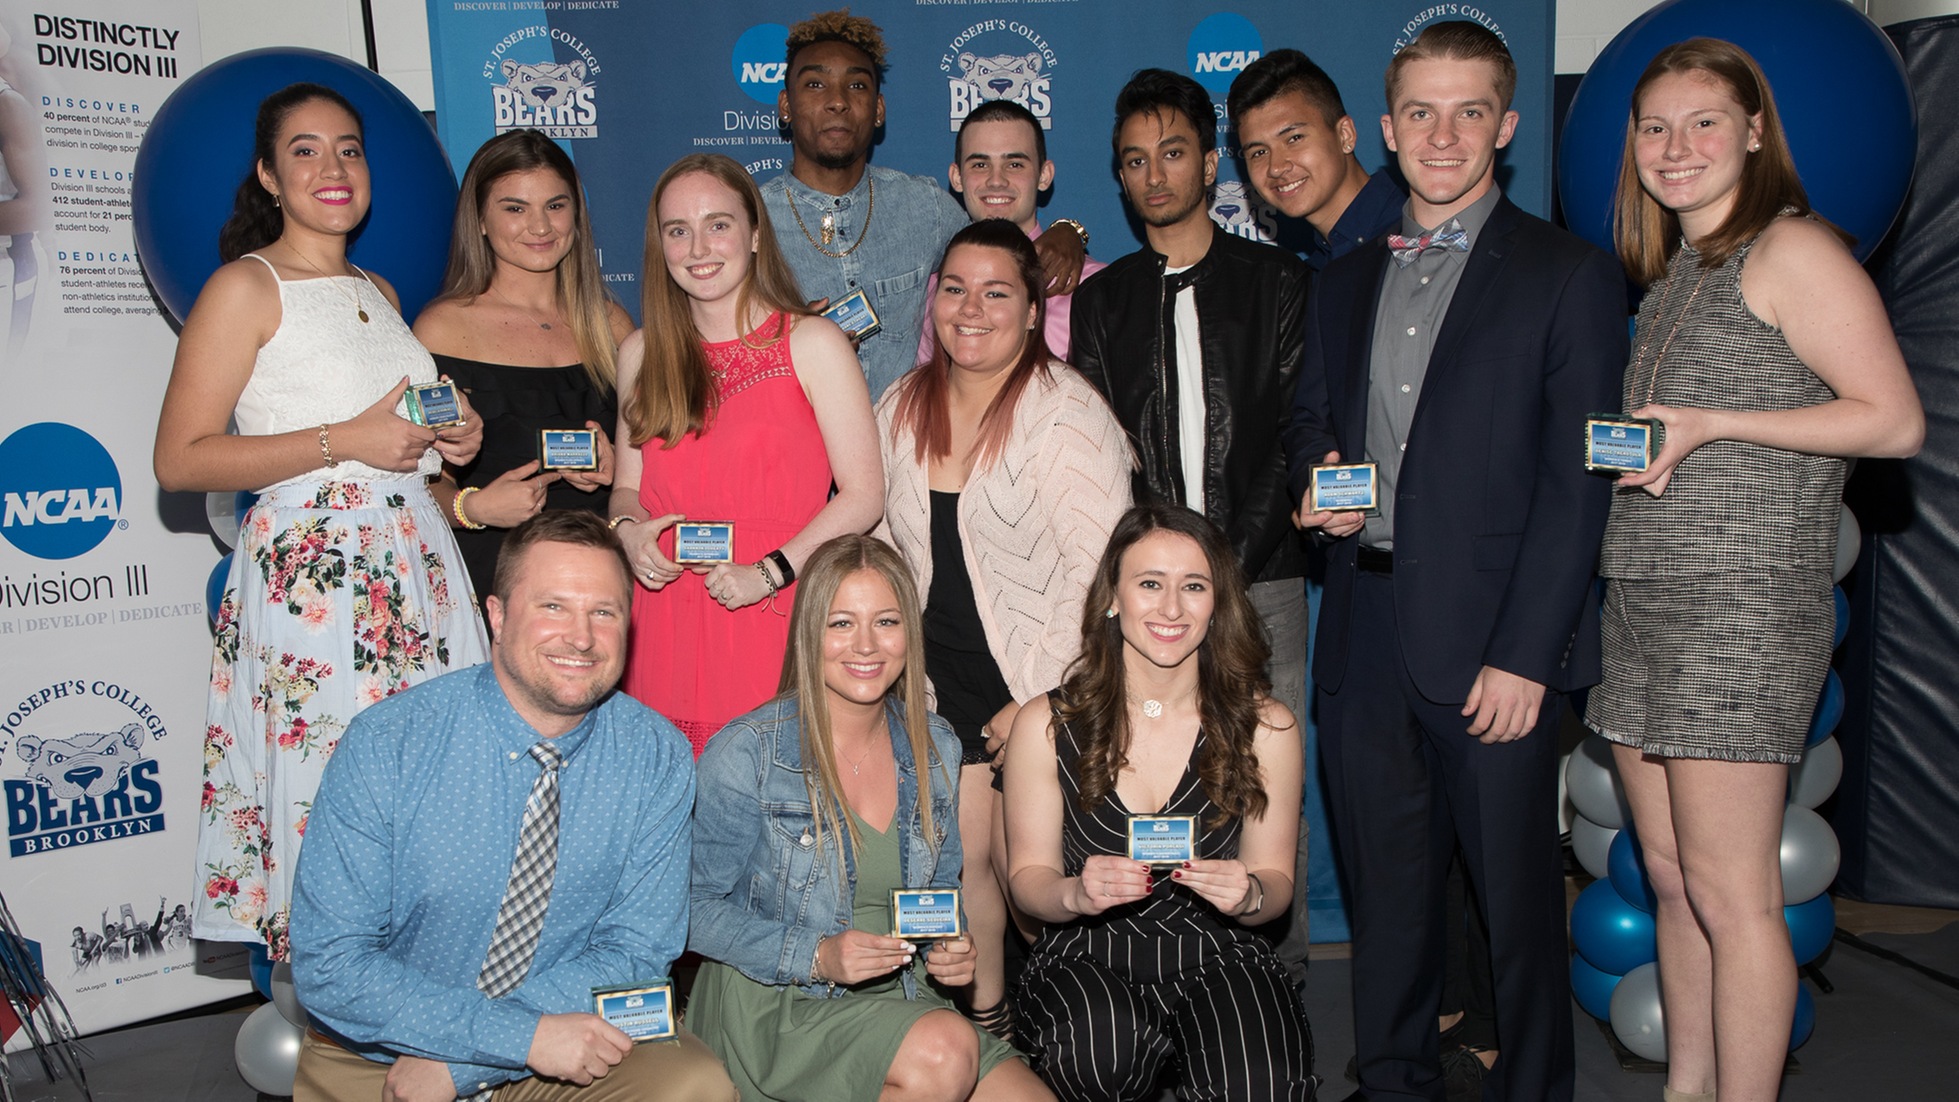 Willis and Sequeira Named Student-Athletes of the Year at Annual Awards Banquet